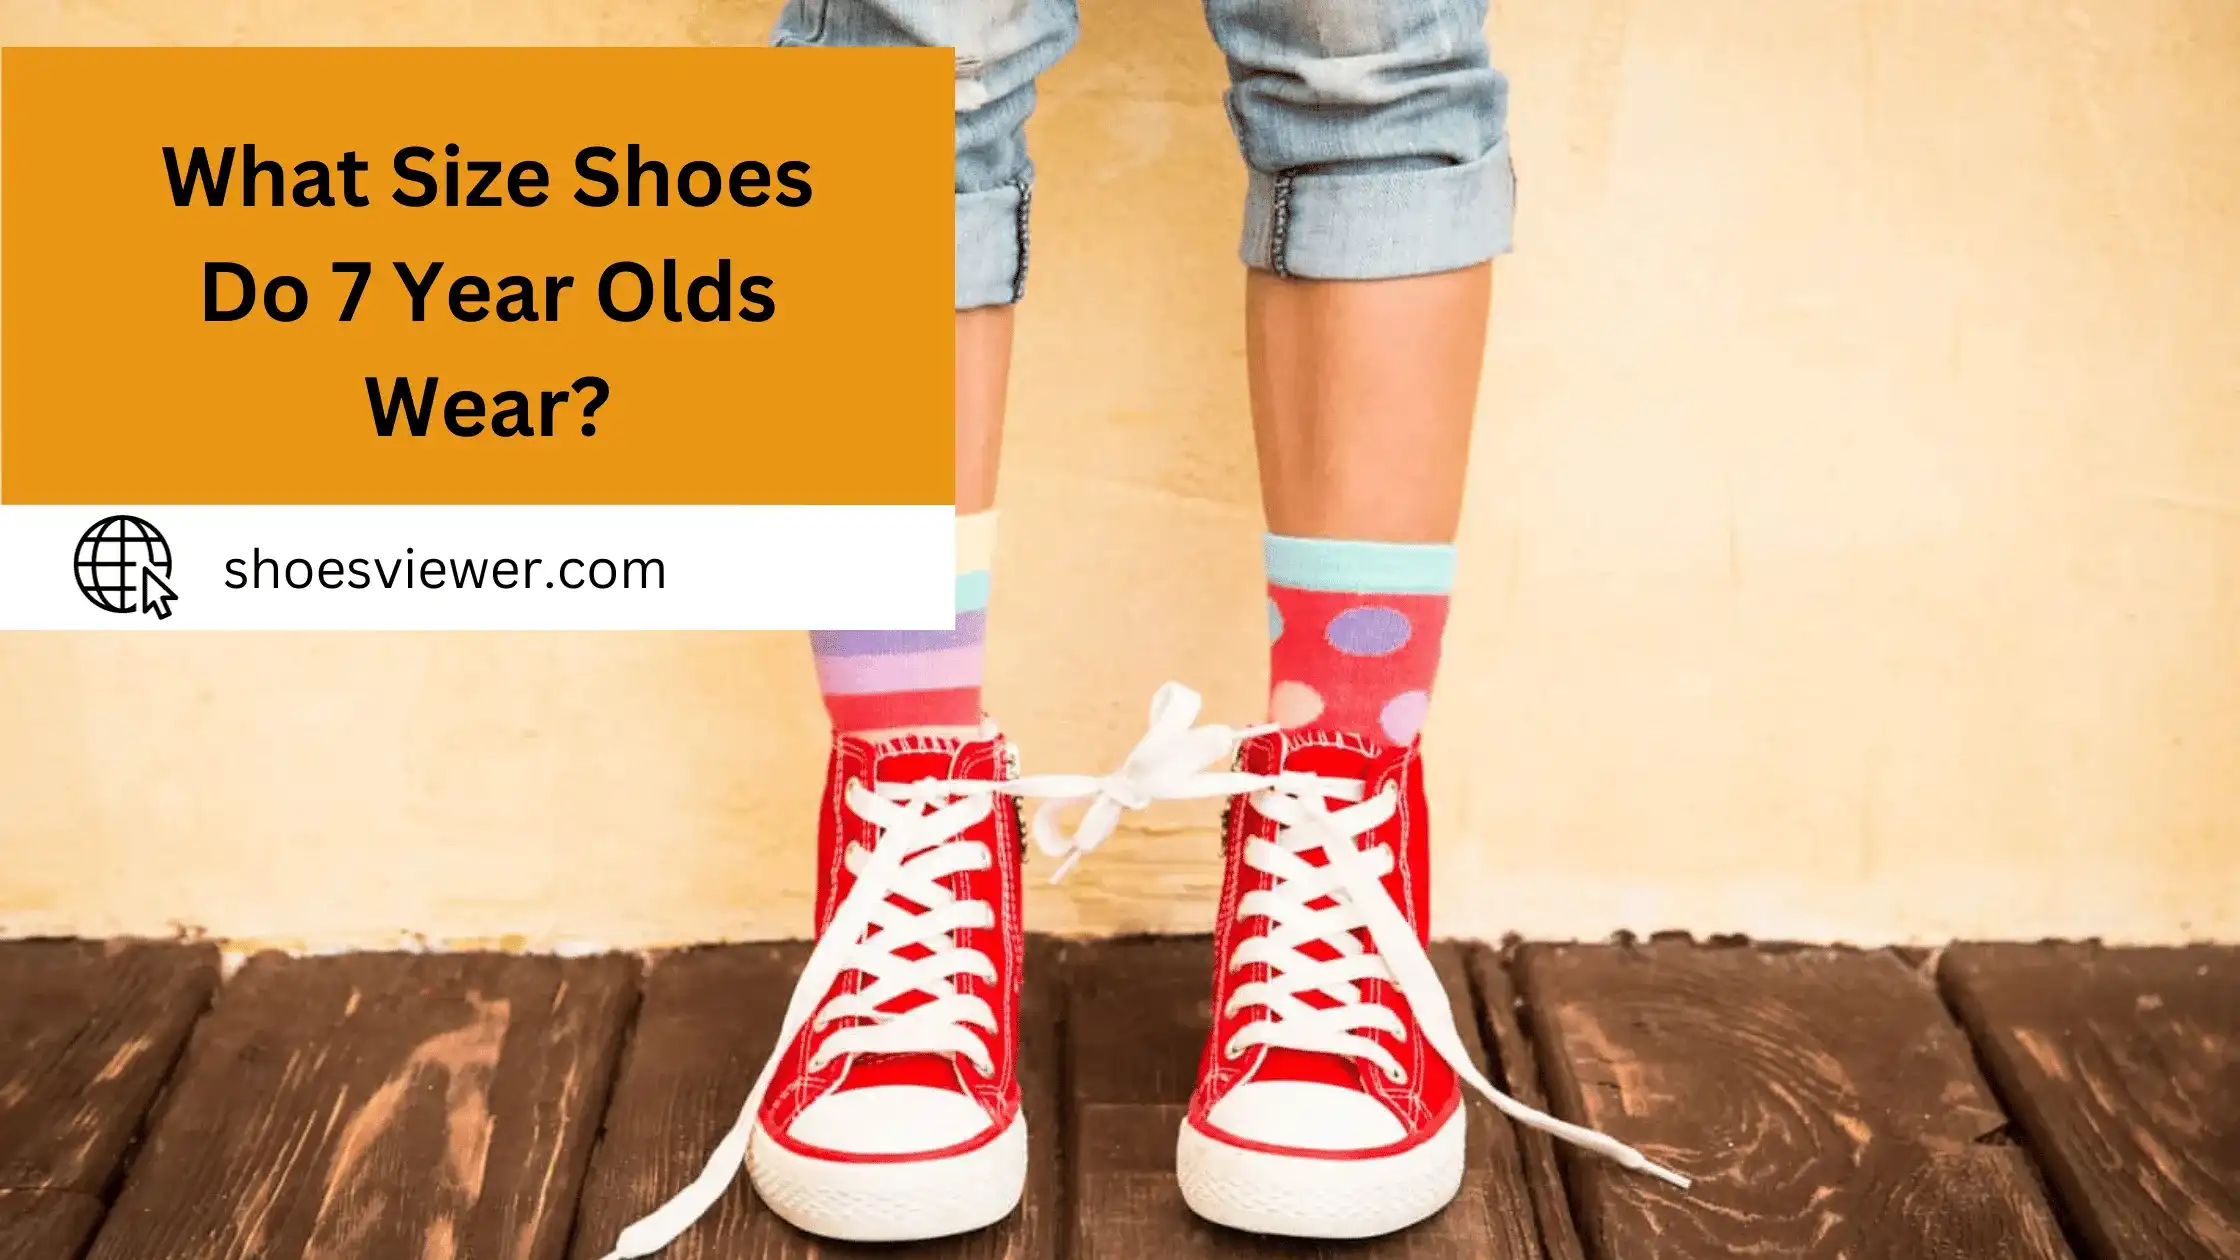 What Size Shoes Do 7 Year Olds Wear? Detailed Information